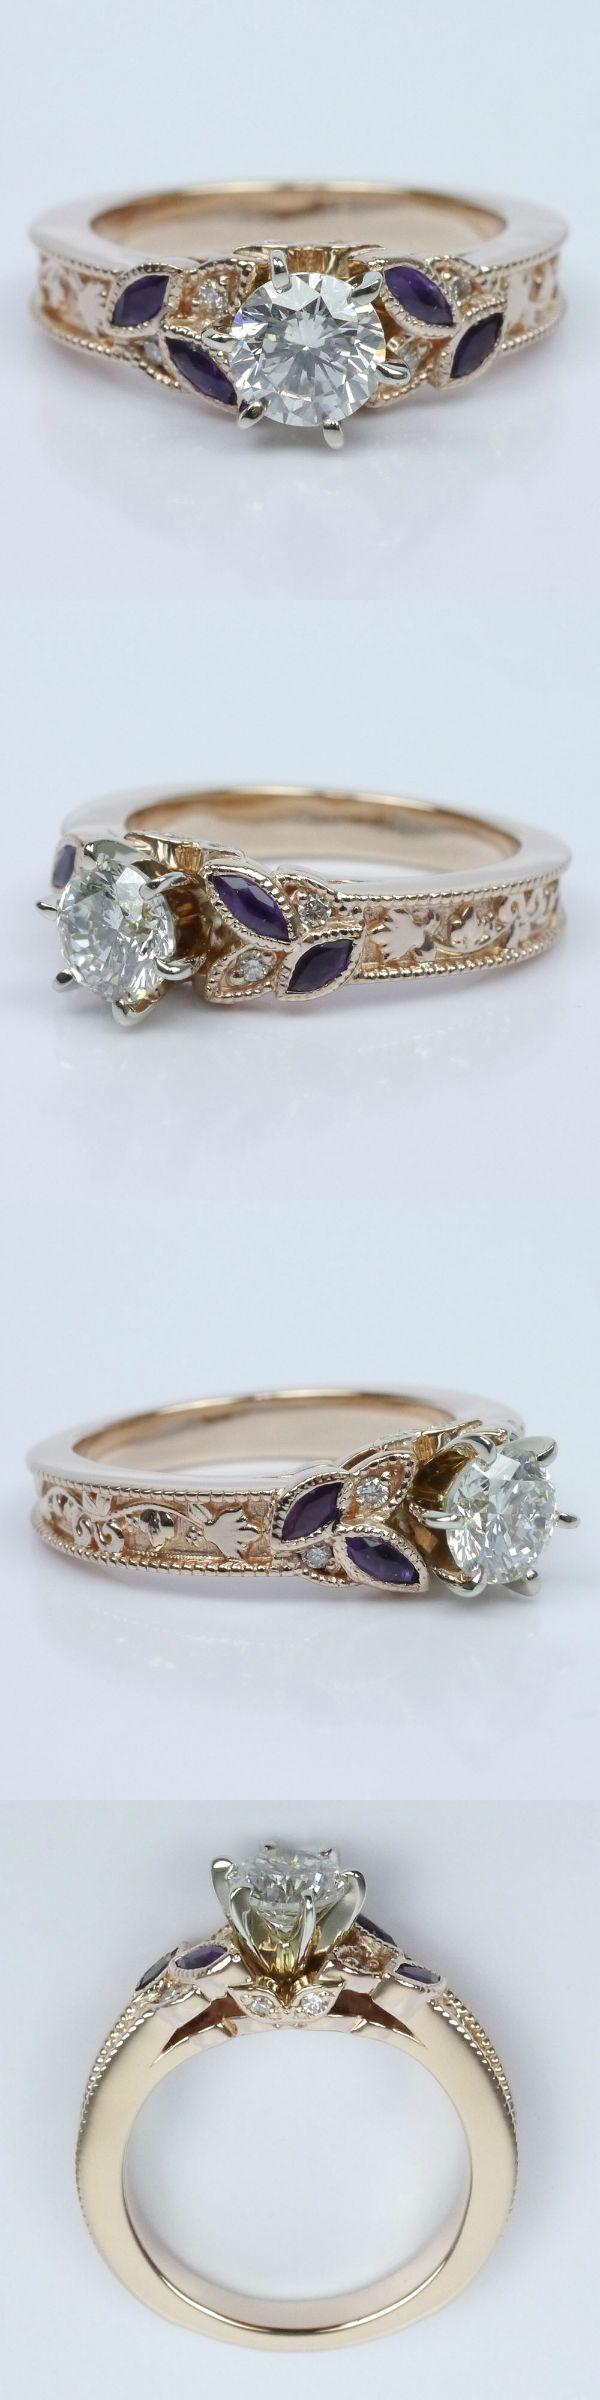 Hochzeit - Vintage Diamond And Amethyst Floral Engagement Ring